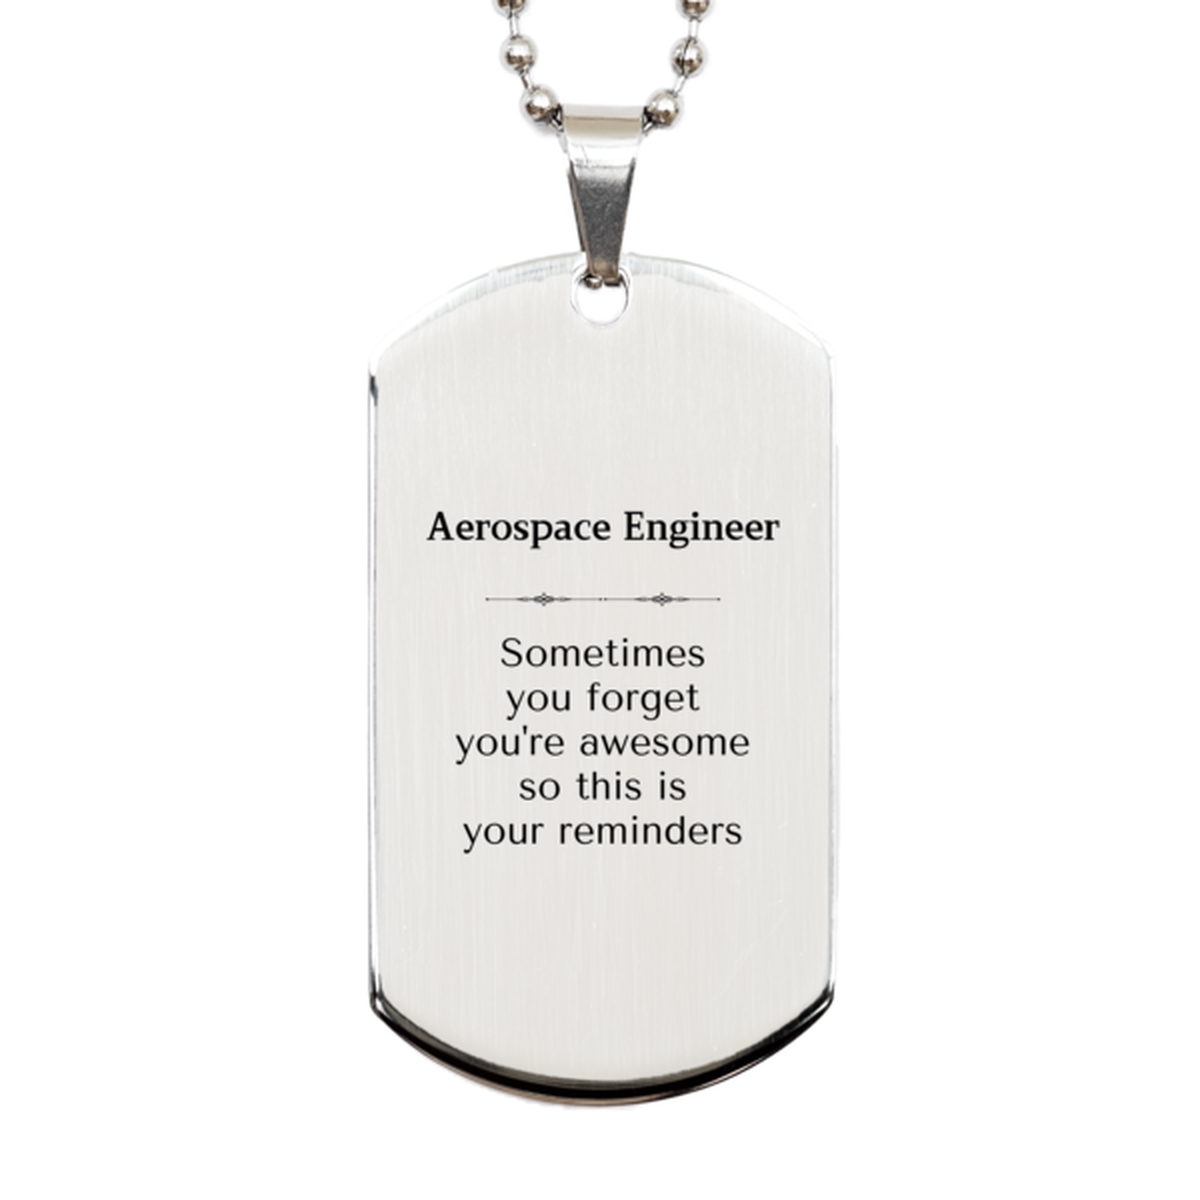 Sentimental Aerospace Engineer Silver Dog Tag, Aerospace Engineer Sometimes you forget you're awesome so this is your reminders, Graduation Christmas Birthday Gifts for Aerospace Engineer, Men, Women, Coworkers